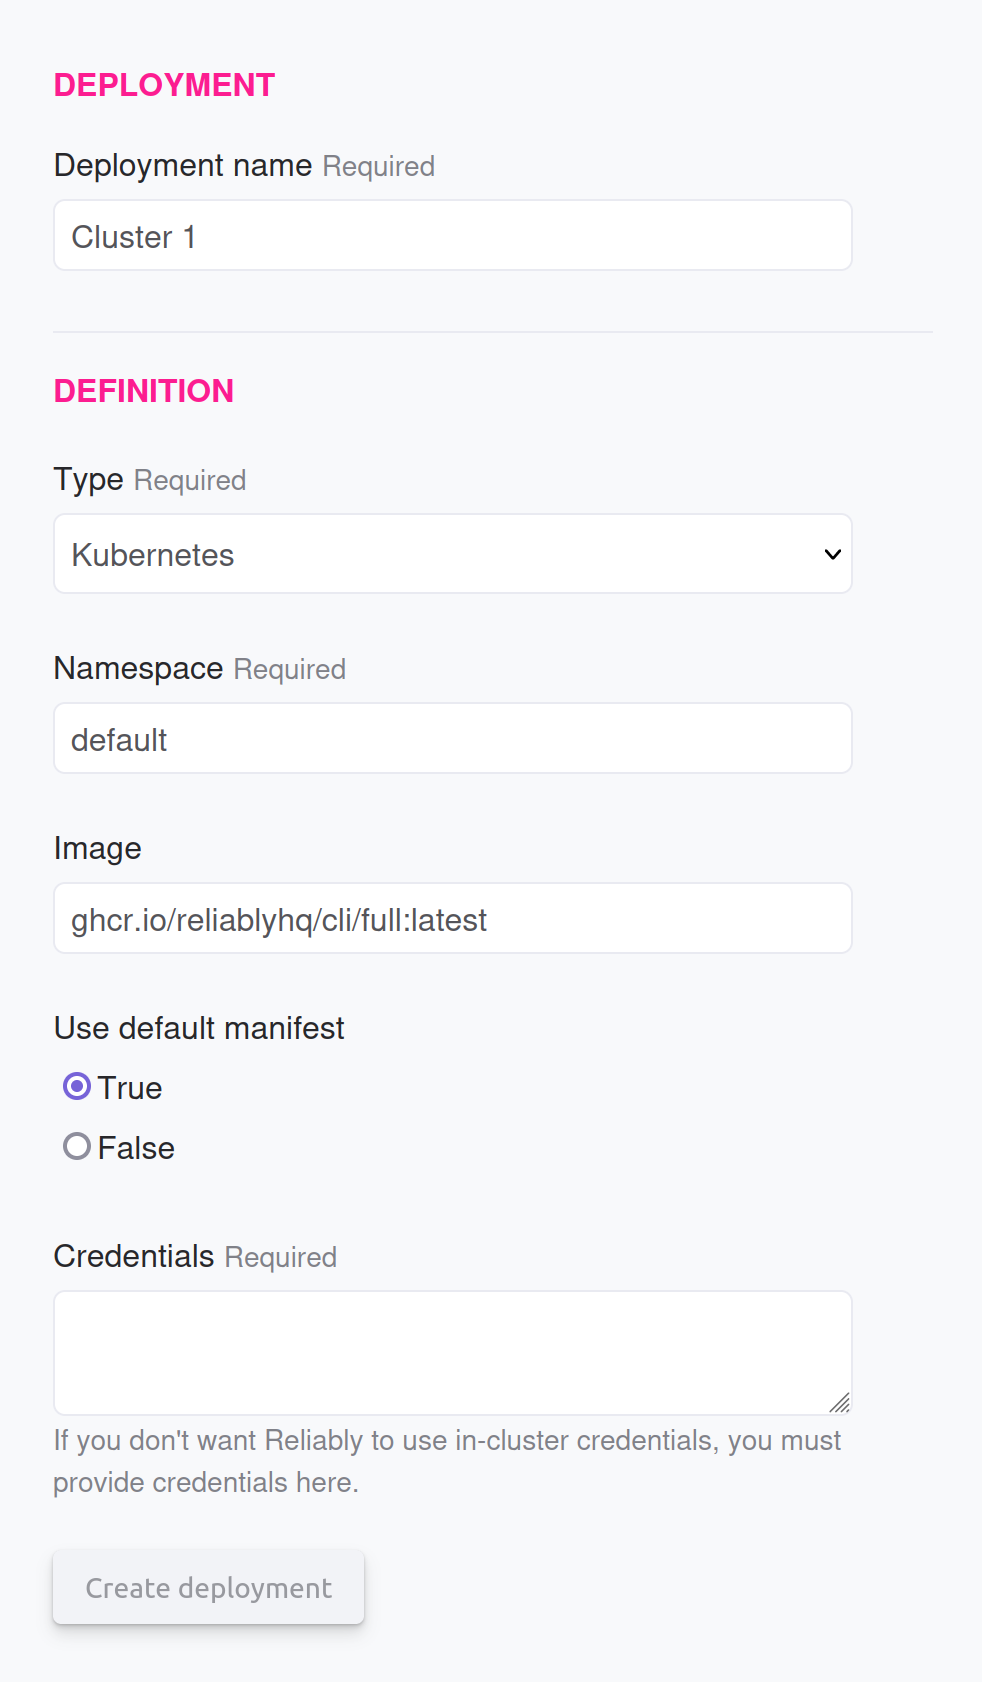 A screenshot of the Reliably Kubernetes deployment form.